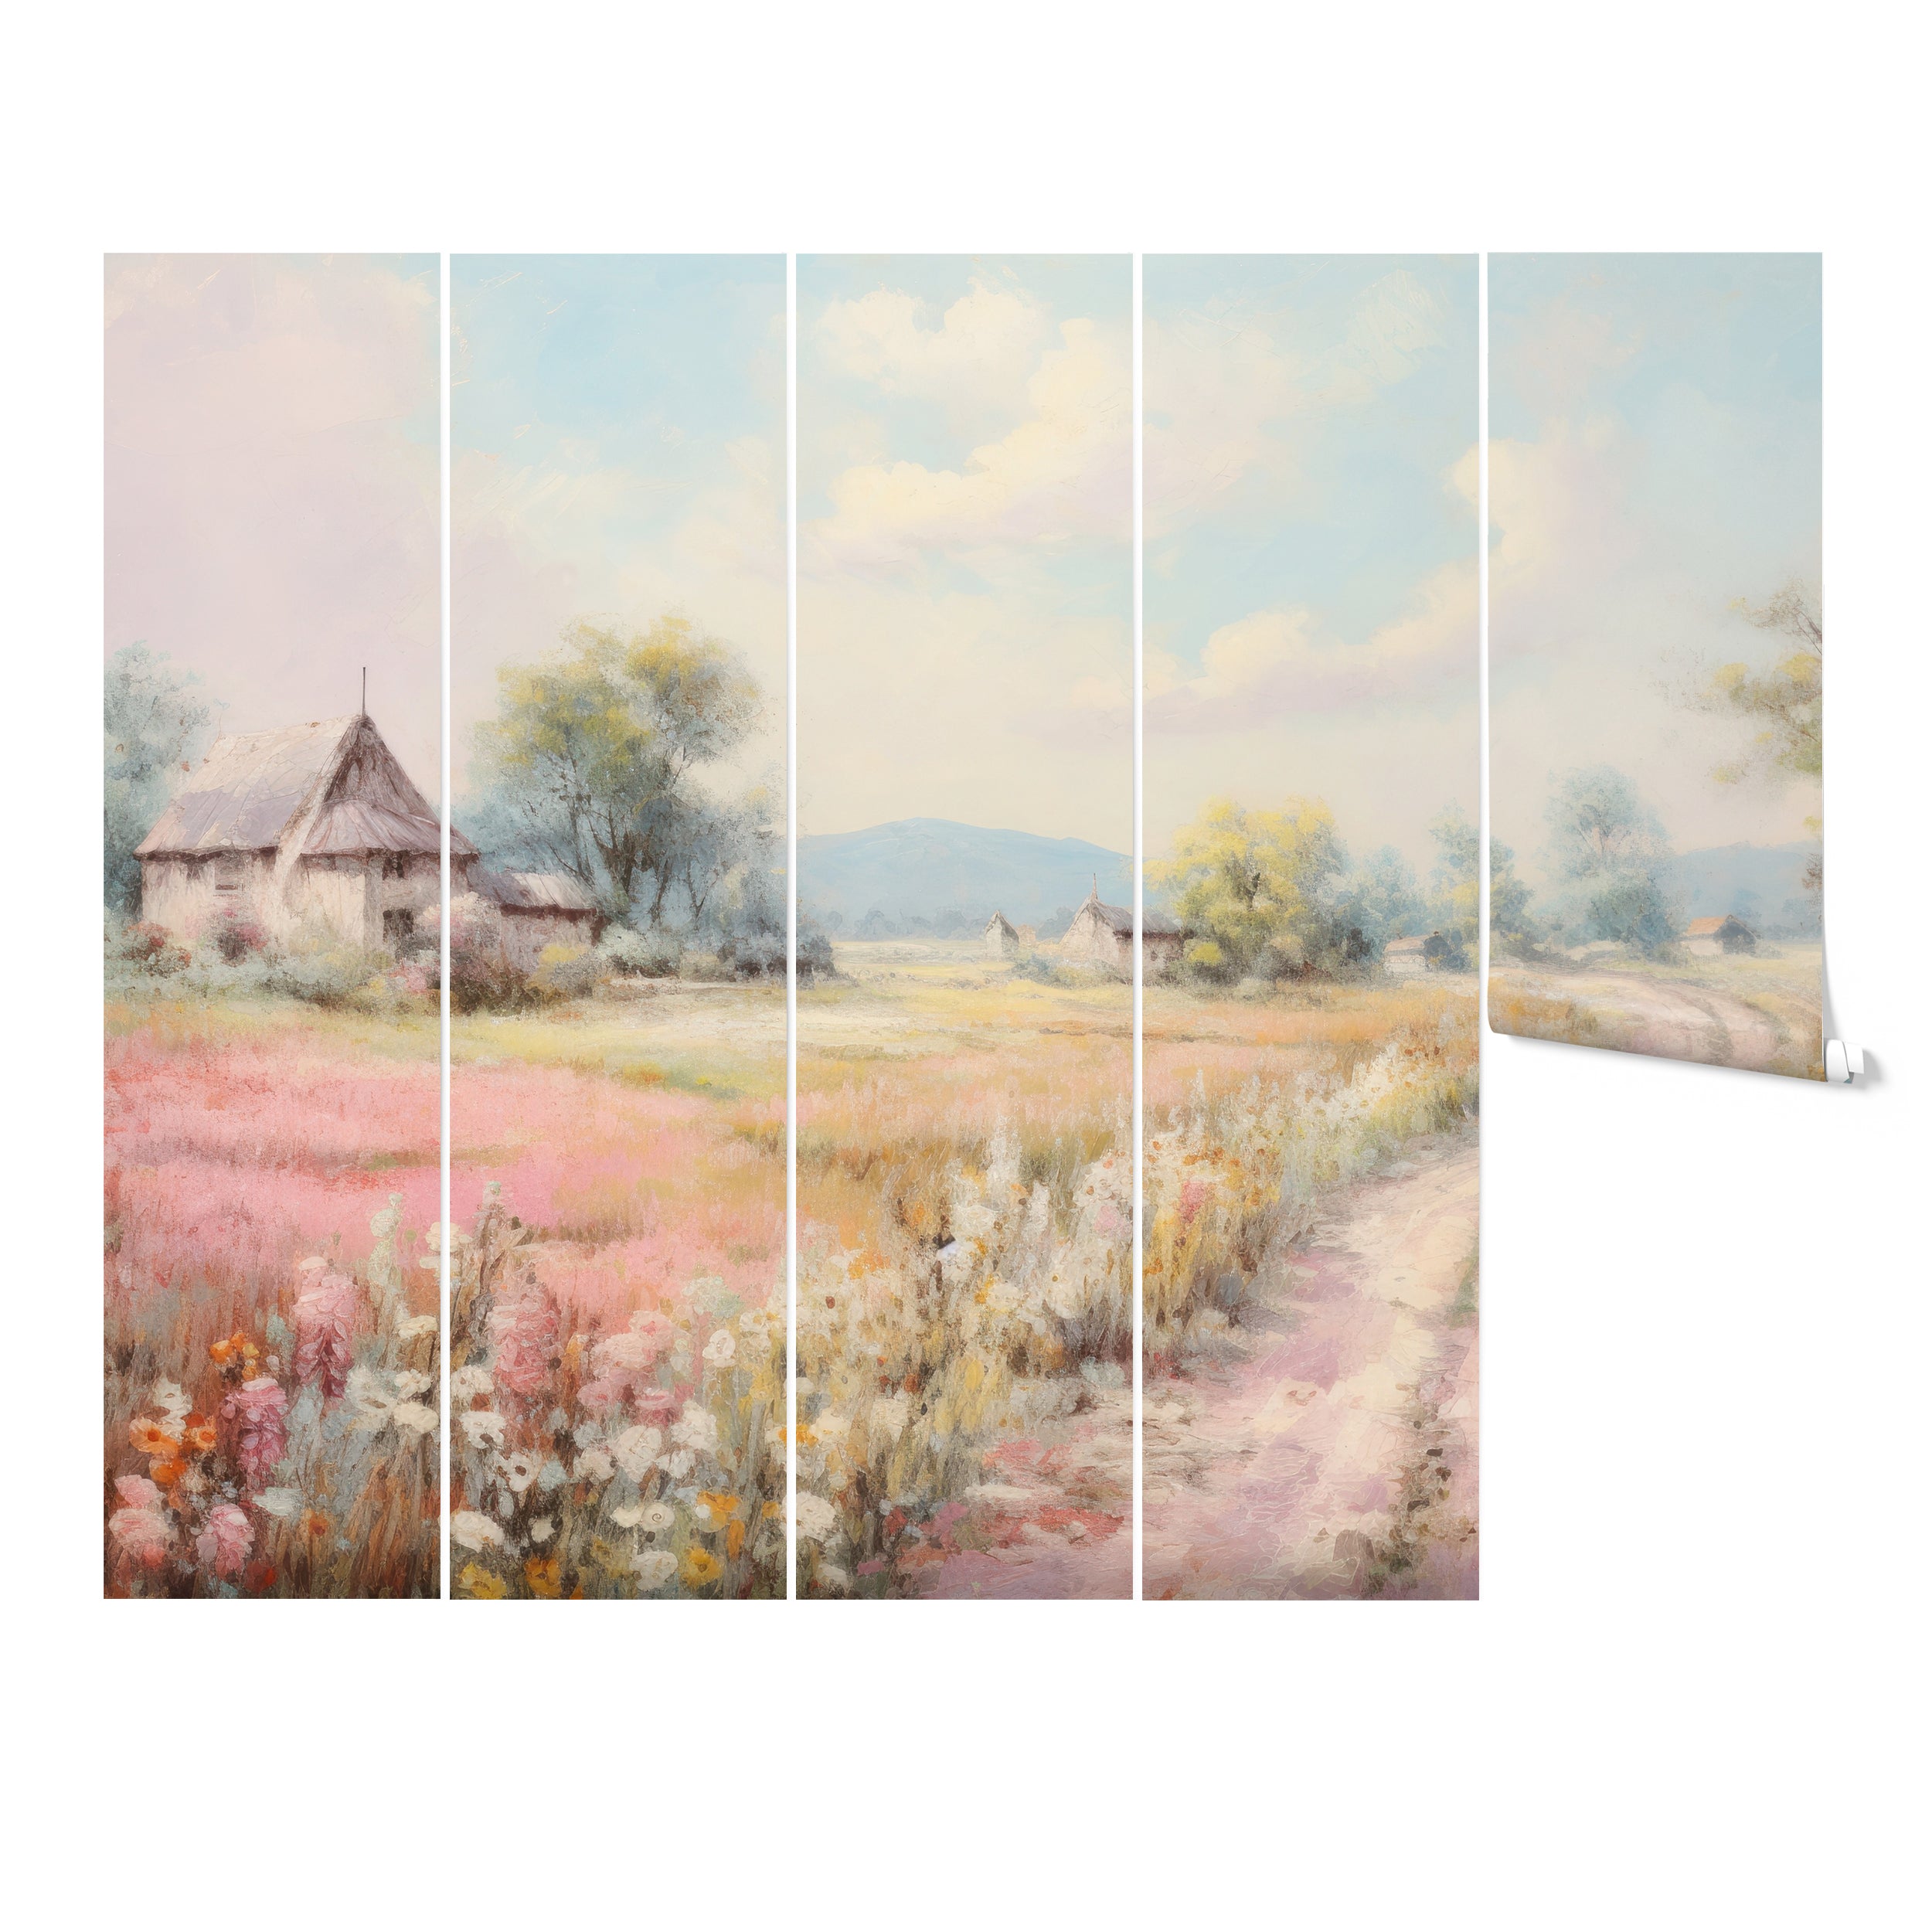 Detailed view of the 'Country Road Mural' wallpaper, showcasing the mural split into five panels. The design depicts a tranquil countryside with a dirt road meandering through fields of wildflowers and leading to quaint cottages, all under a light blue sky with clouds.